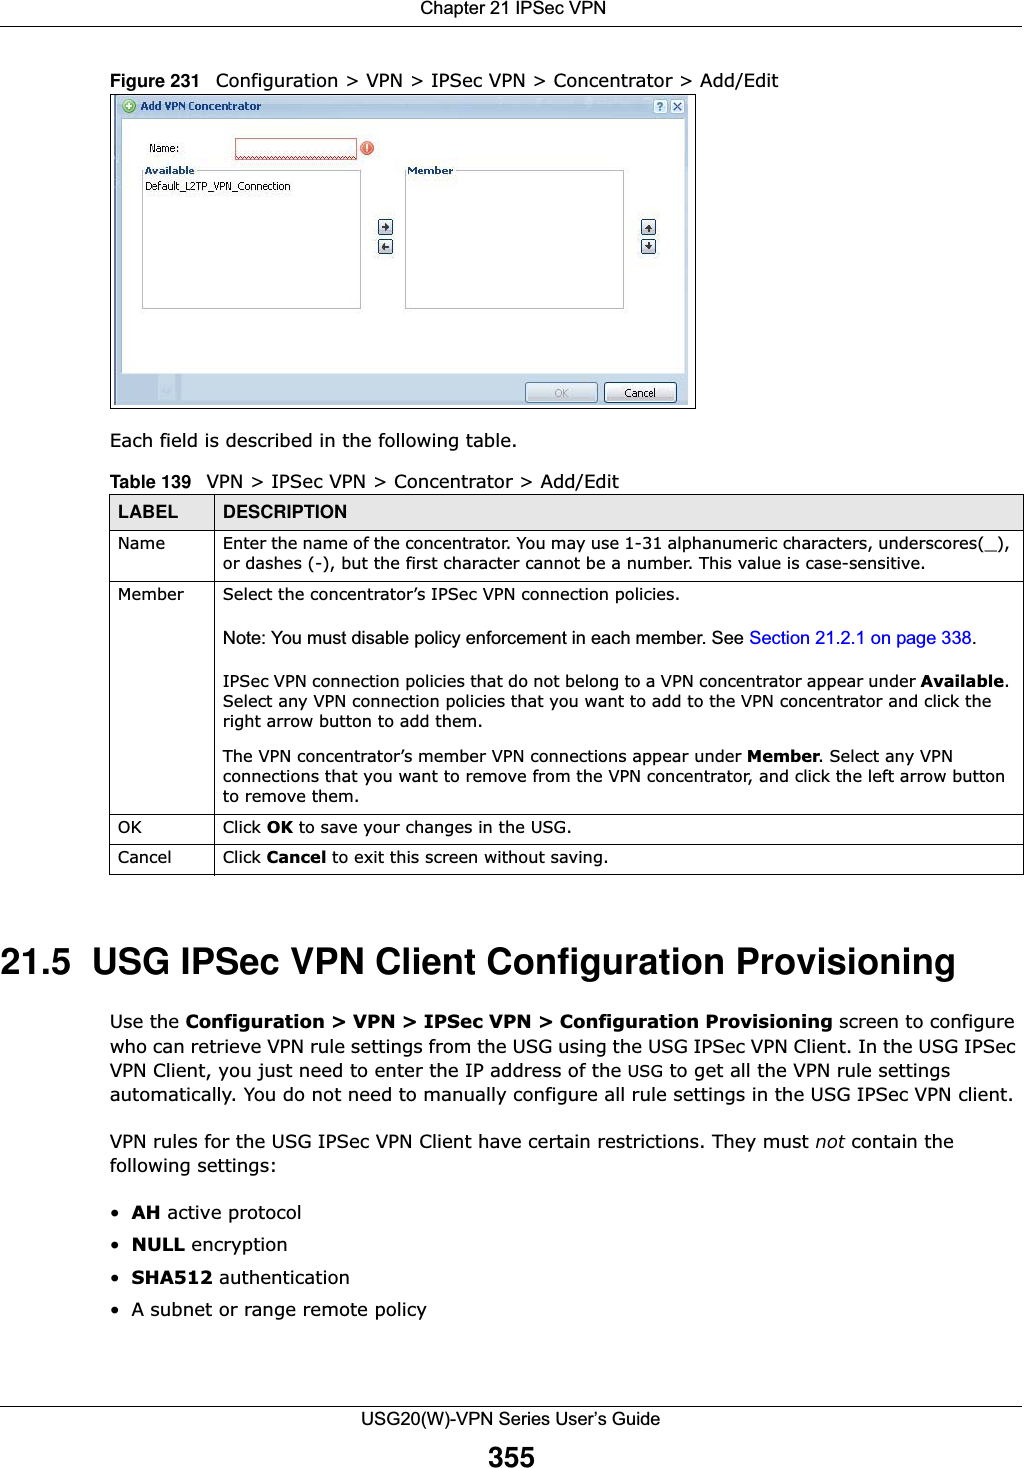  Chapter 21 IPSec VPNUSG20(W)-VPN Series User’s Guide355Figure 231   Configuration &gt; VPN &gt; IPSec VPN &gt; Concentrator &gt; Add/EditEach field is described in the following table.  21.5  USG IPSec VPN Client Configuration ProvisioningUse the Configuration &gt; VPN &gt; IPSec VPN &gt; Configuration Provisioning screen to configure who can retrieve VPN rule settings from the USG using the USG IPSec VPN Client. In the USG IPSec VPN Client, you just need to enter the IP address of the USG to get all the VPN rule settings automatically. You do not need to manually configure all rule settings in the USG IPSec VPN client. VPN rules for the USG IPSec VPN Client have certain restrictions. They must not contain the following settings:•AH active protocol•NULL encryption•SHA512 authentication• A subnet or range remote policyTable 139   VPN &gt; IPSec VPN &gt; Concentrator &gt; Add/EditLABEL DESCRIPTIONName Enter the name of the concentrator. You may use 1-31 alphanumeric characters, underscores(_), or dashes (-), but the first character cannot be a number. This value is case-sensitive.Member Select the concentrator’s IPSec VPN connection policies.Note: You must disable policy enforcement in each member. See Section 21.2.1 on page 338.IPSec VPN connection policies that do not belong to a VPN concentrator appear under Available. Select any VPN connection policies that you want to add to the VPN concentrator and click the right arrow button to add them. The VPN concentrator’s member VPN connections appear under Member. Select any VPN connections that you want to remove from the VPN concentrator, and click the left arrow button to remove them. OK Click OK to save your changes in the USG.Cancel Click Cancel to exit this screen without saving.